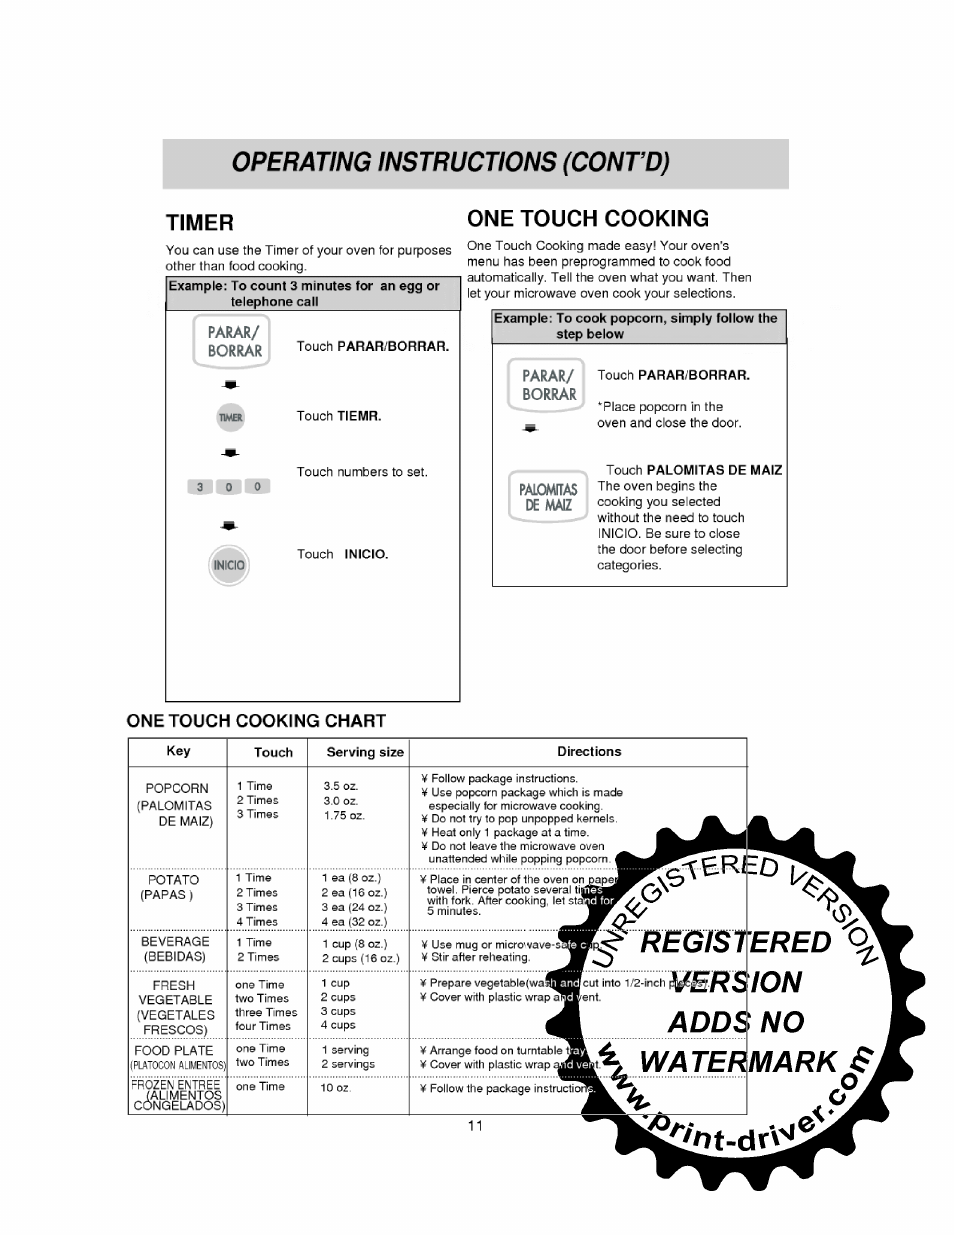 Timer, One touch cooking, One touch cooking chart | Operating instructions (contv) | LG MS-0745V User Manual | Page 11 / 19